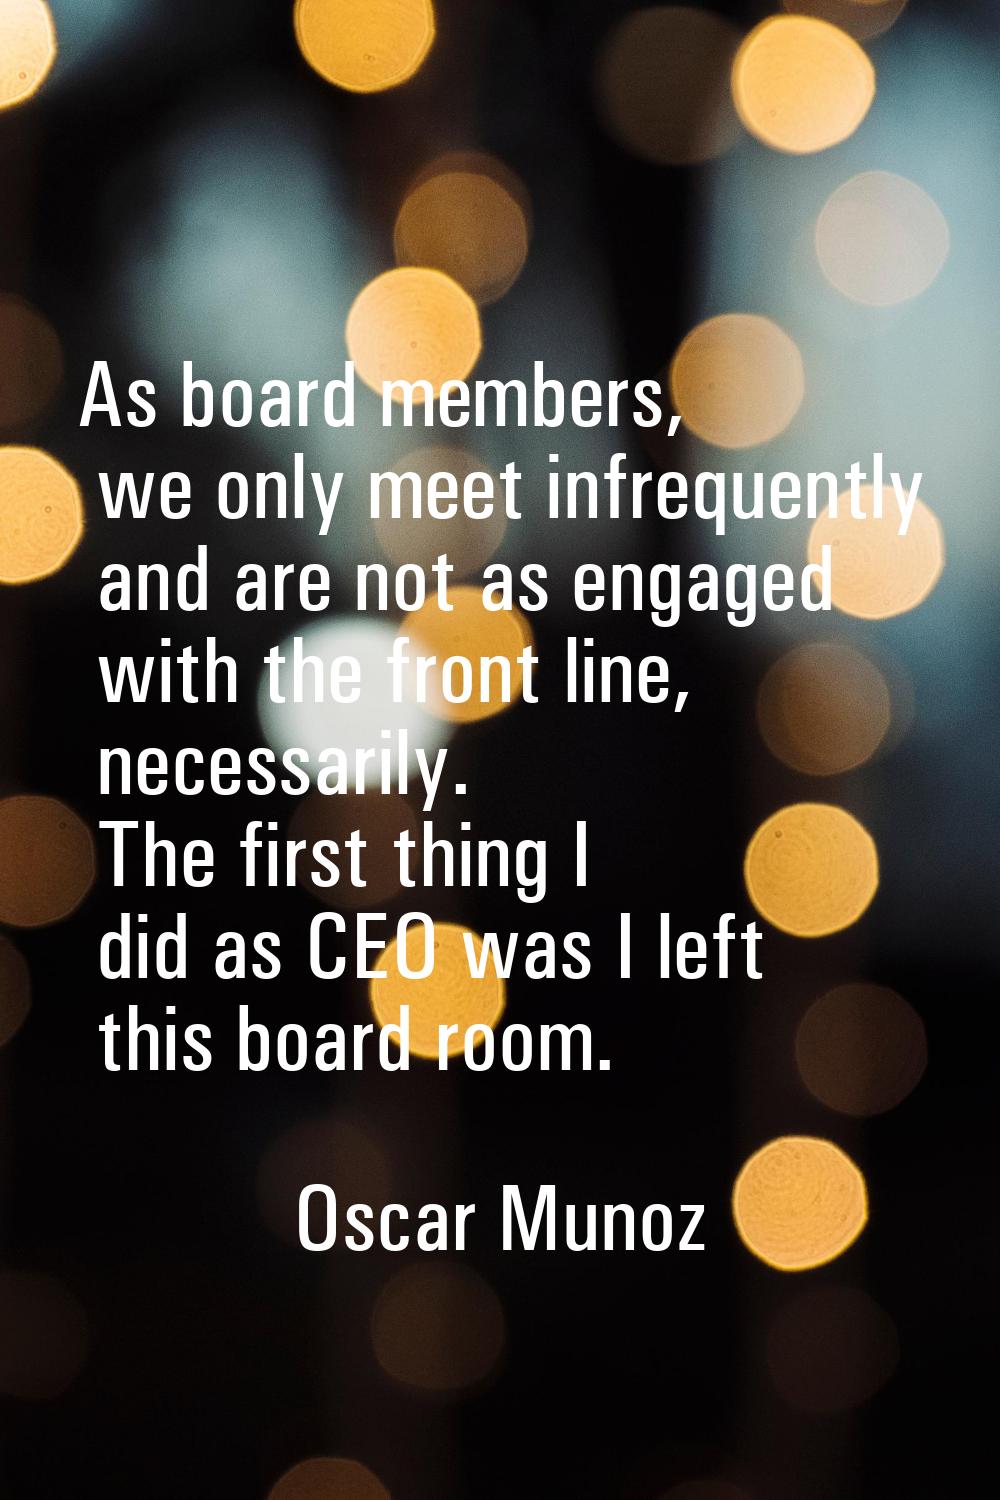 As board members, we only meet infrequently and are not as engaged with the front line, necessarily